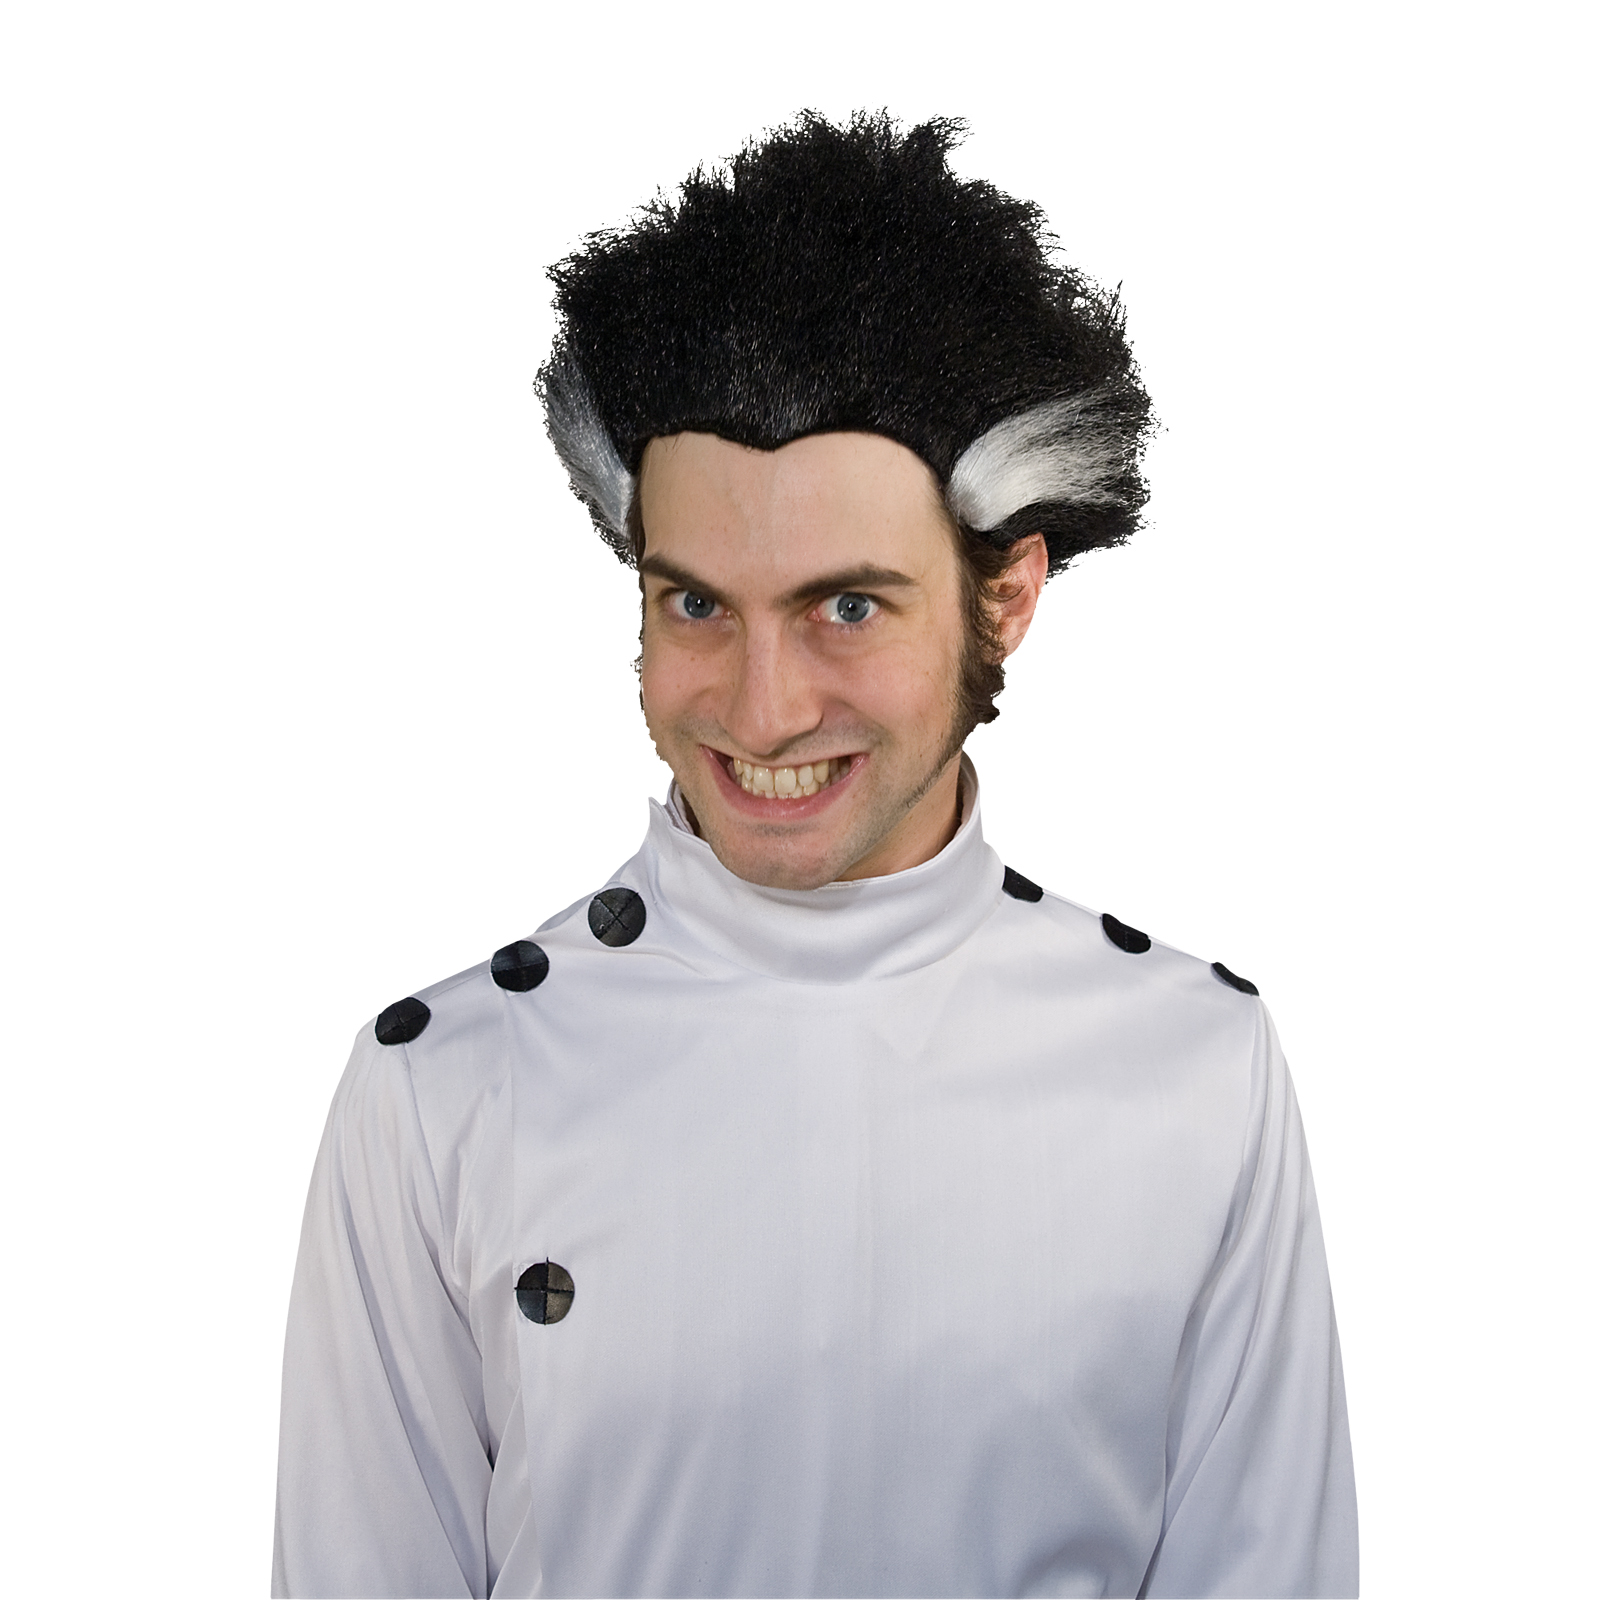 Mad Science Wig Black with White Stripe Costume Accessory